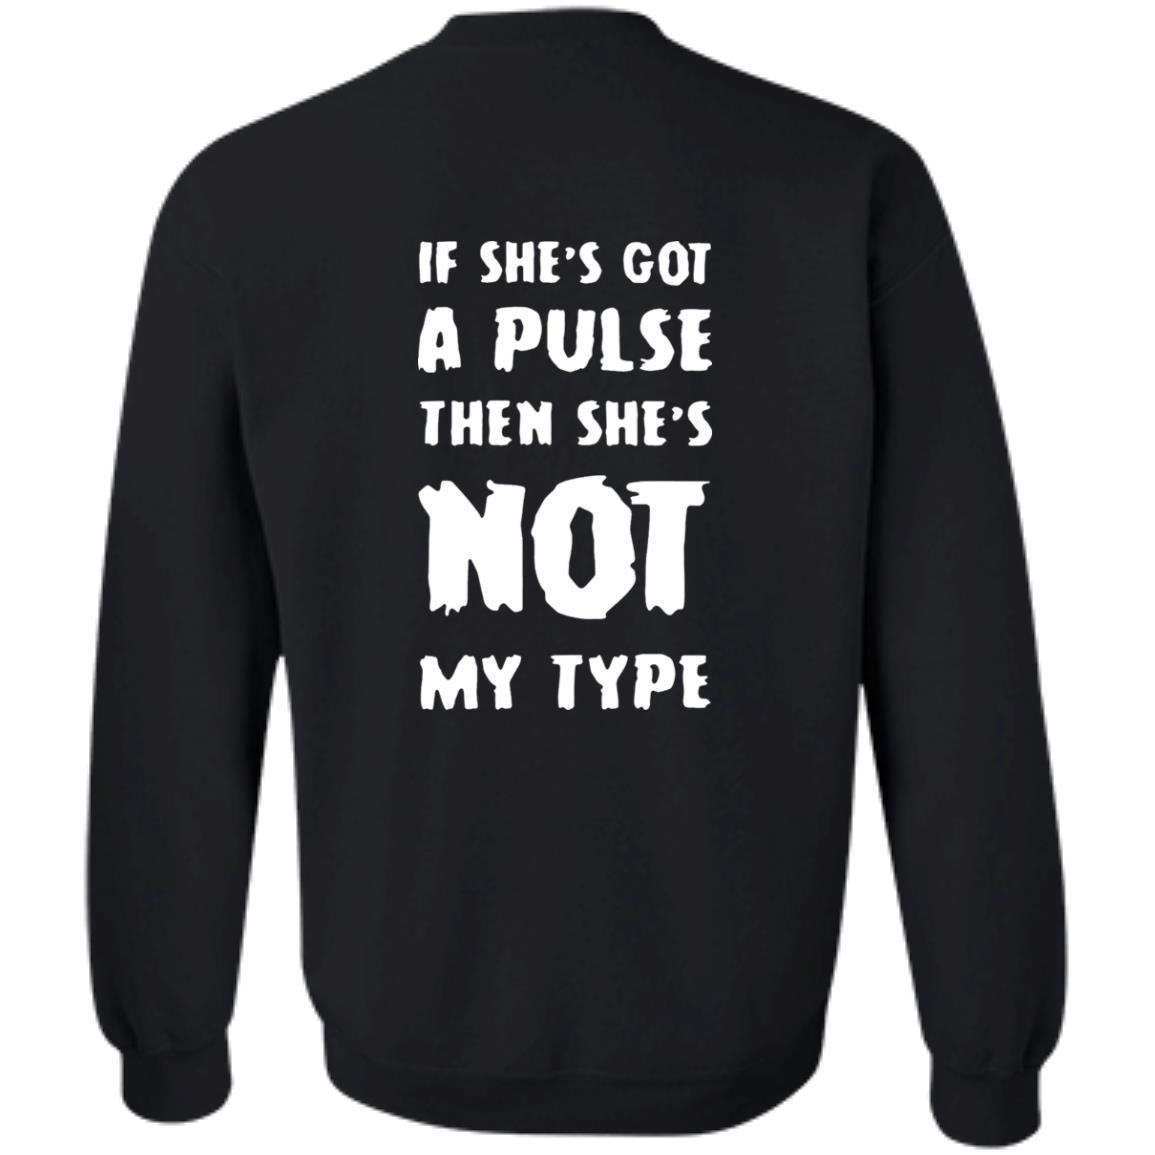 If She’s Got A Pulse Then She’s Not My Type shirt